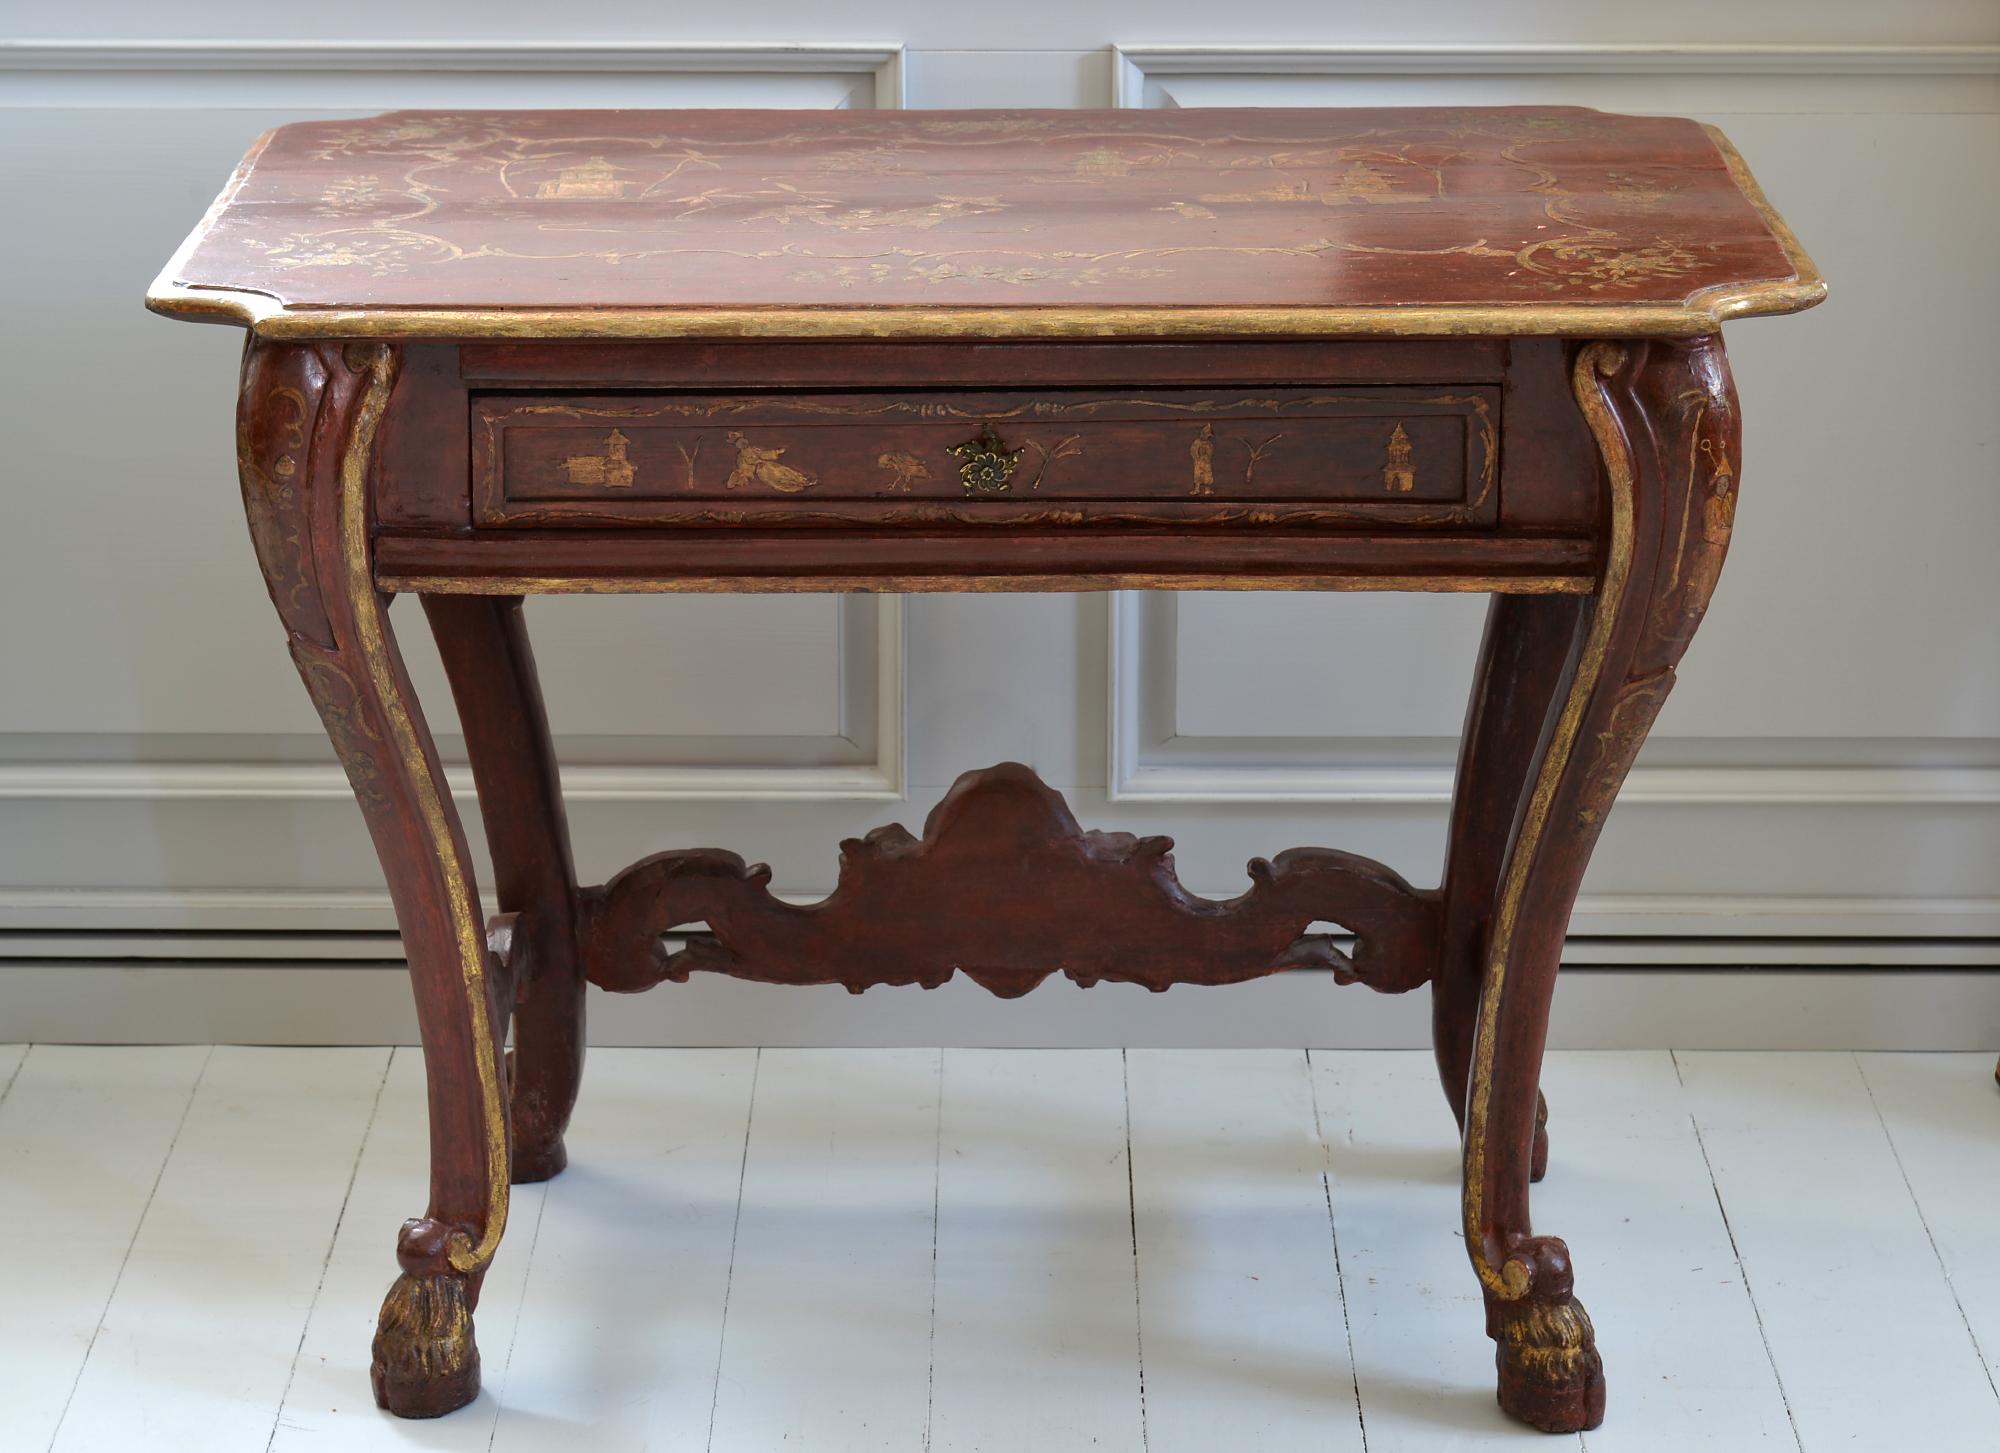 18th century Venetian center table
red lacquered with painted gilt figures
with one-drawer
a very unusual and rare Venetian table with lovely figures also on the top
in a very charming condition.
     